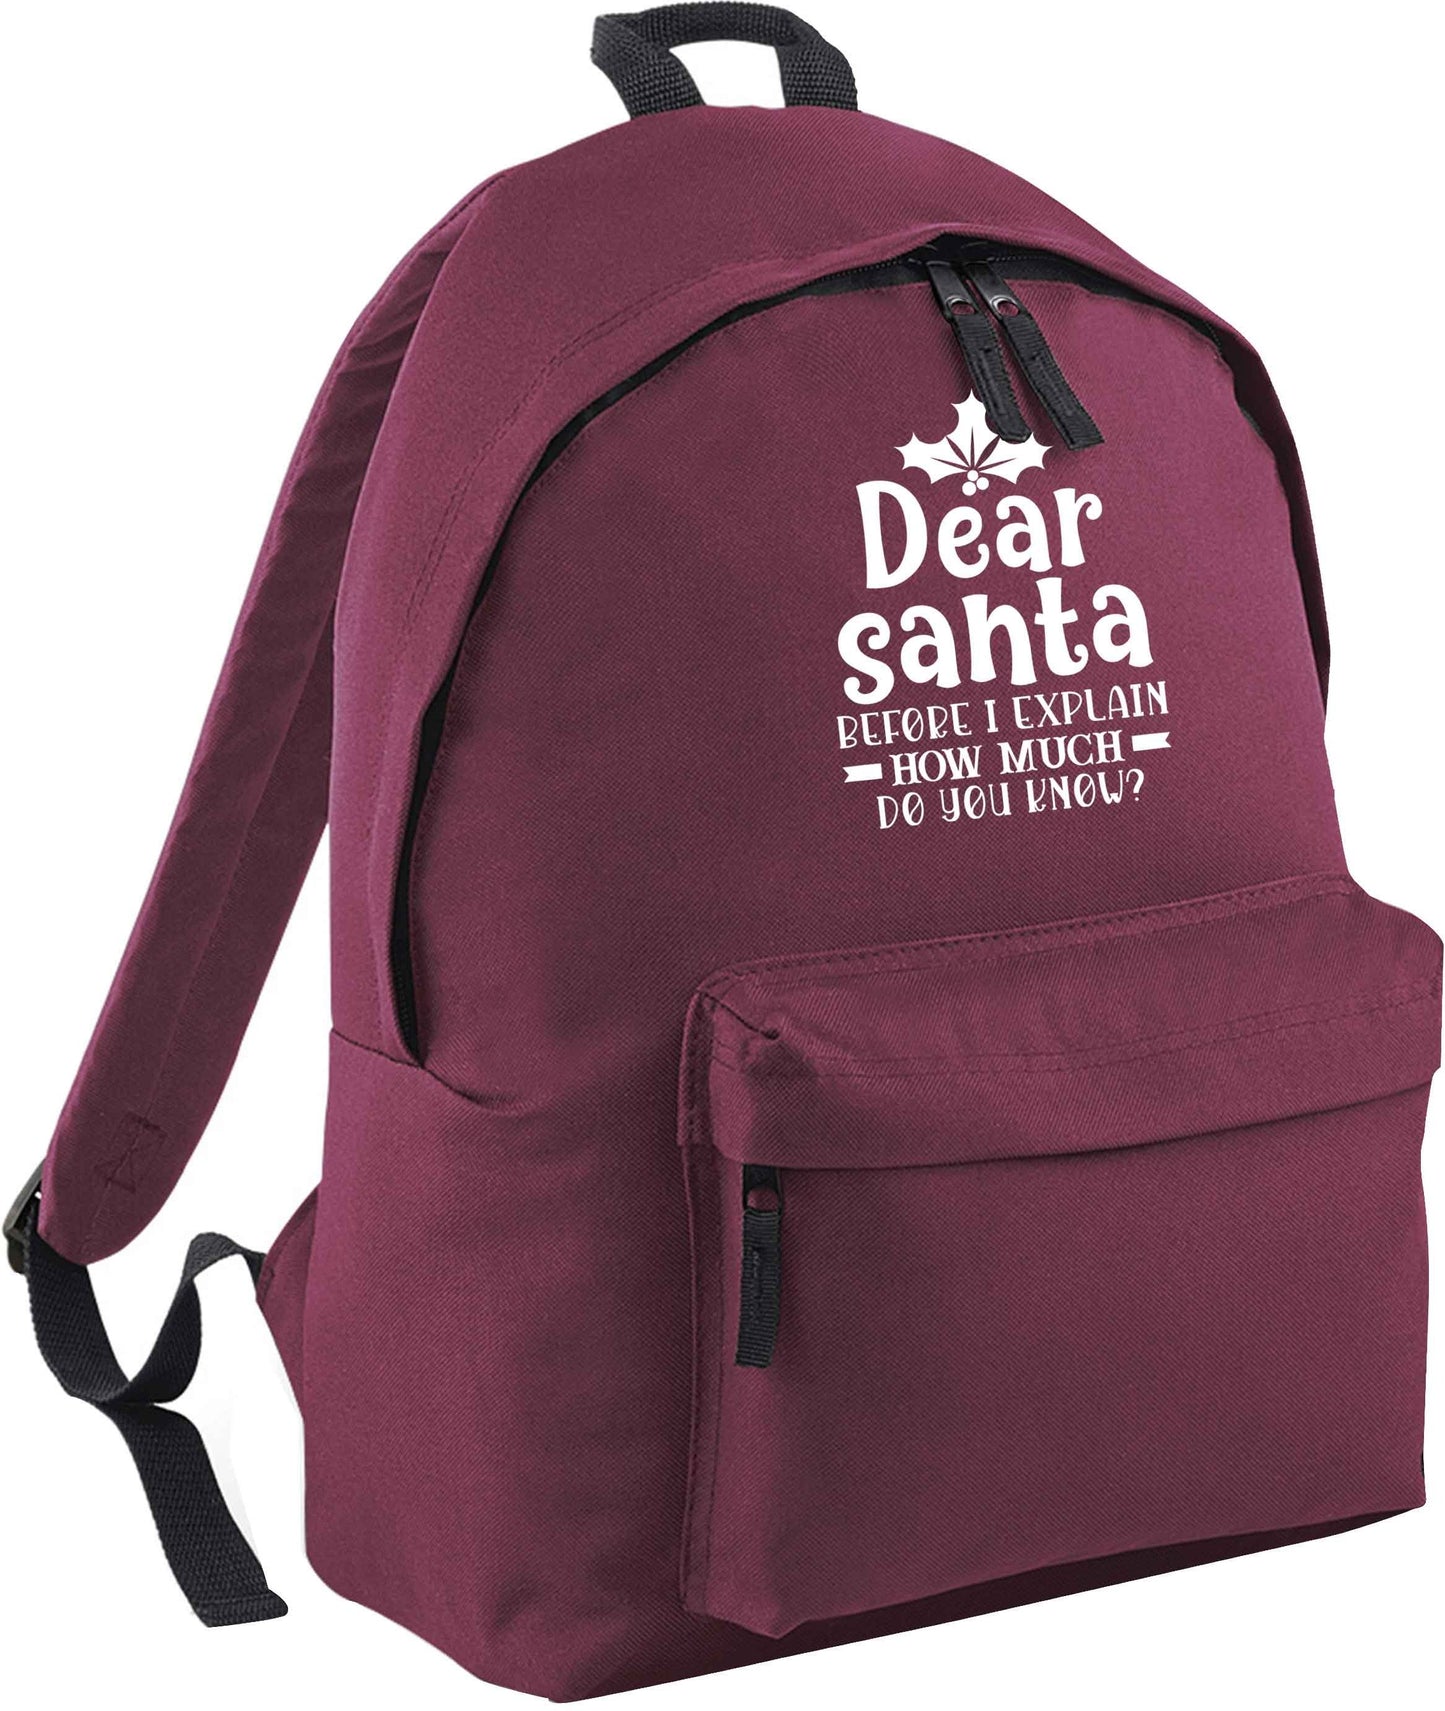 Santa before I explain how much do you know? maroon adults backpack